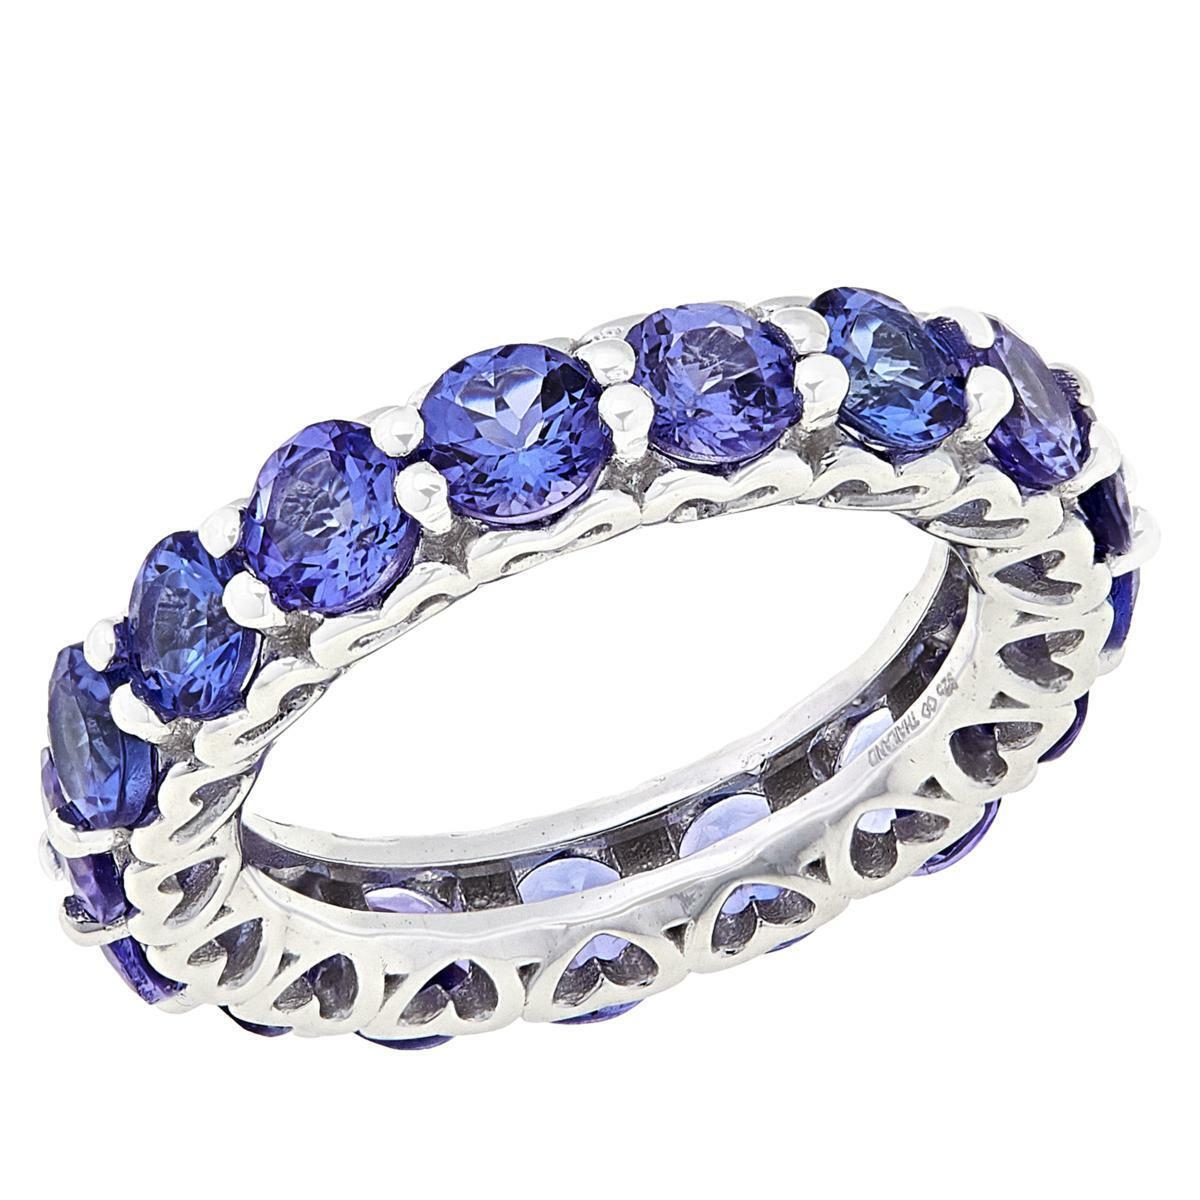 Colleen Lopez Sterling Silver Genuine Tanzanite Eternity Band Ring. Size 6